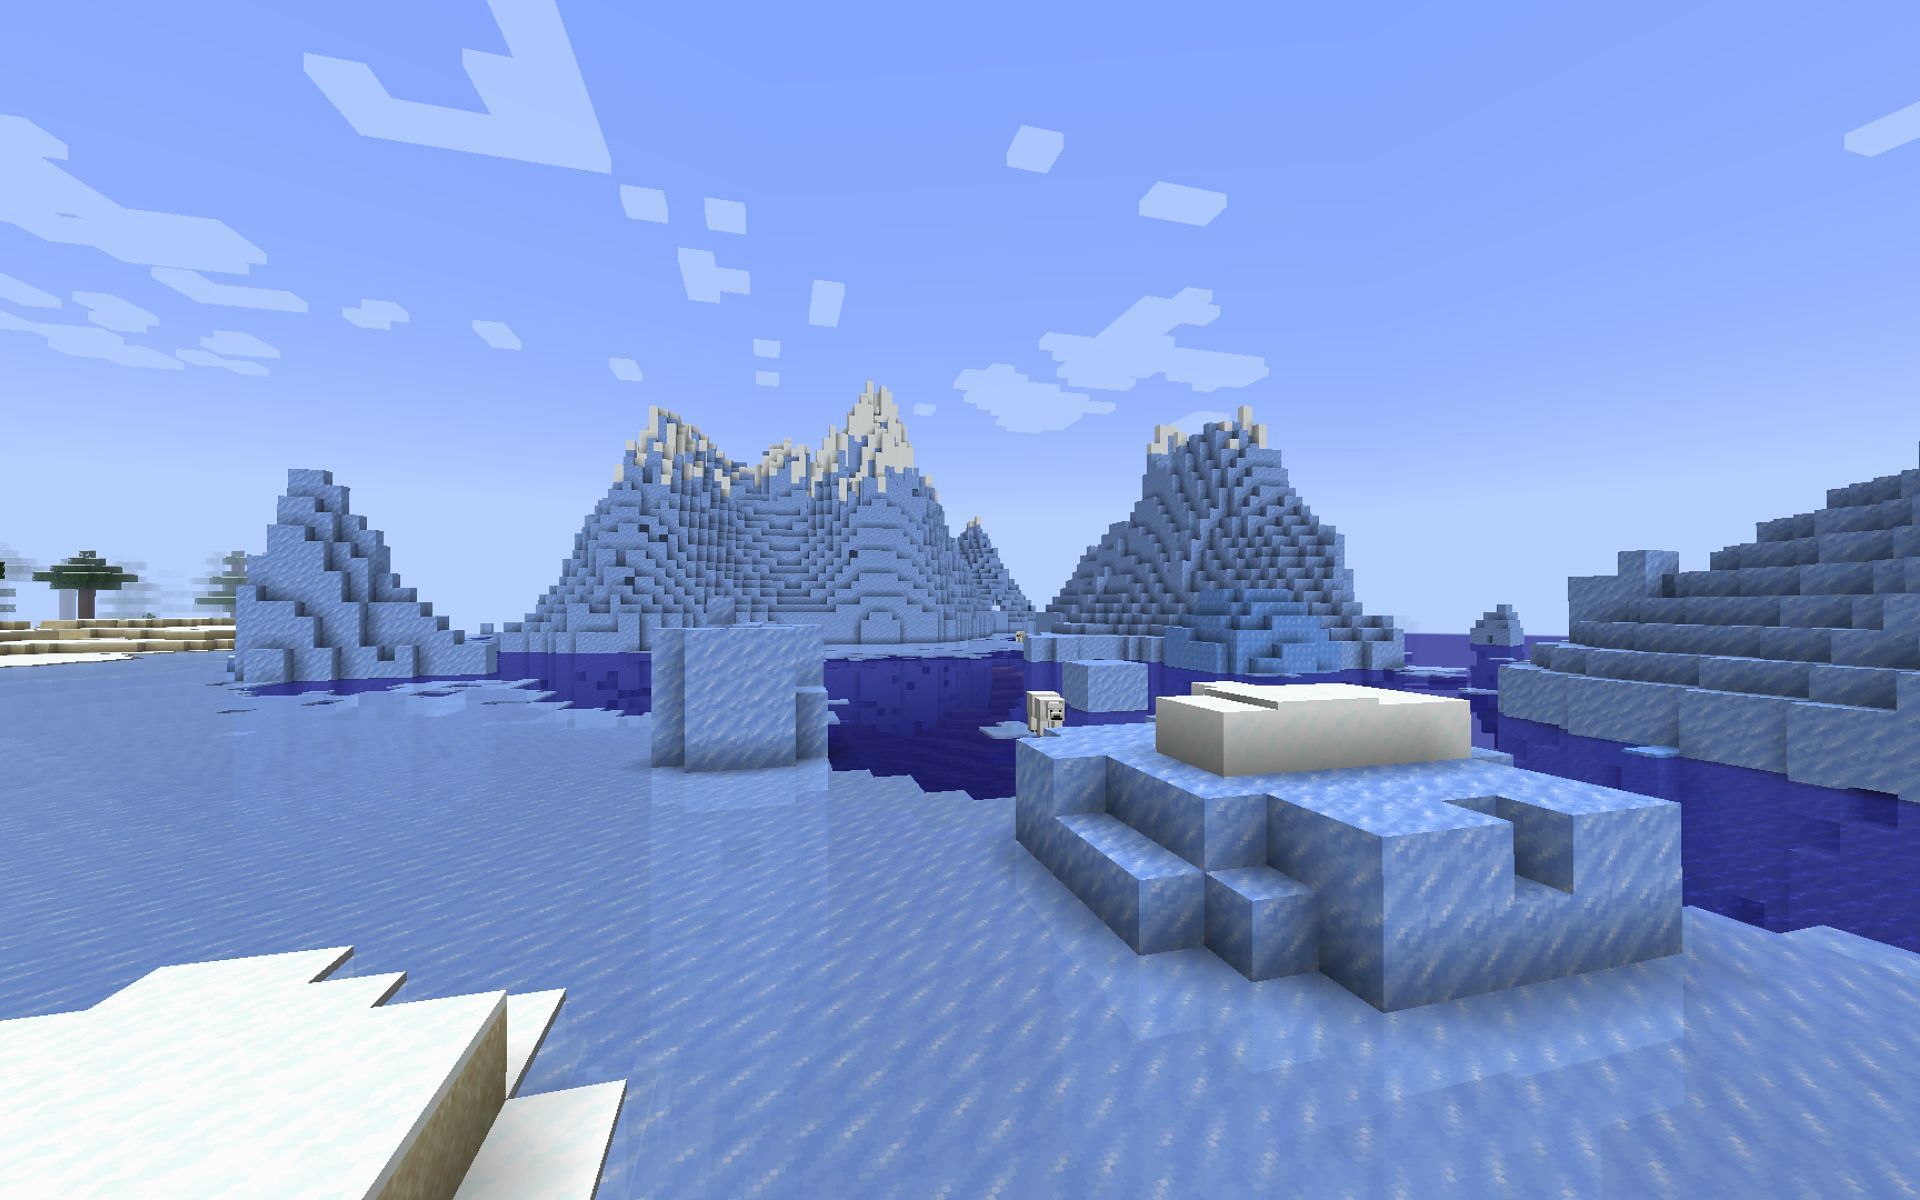 Ice blocks can be extremely slippery in Minecraft (Image via Mojang)